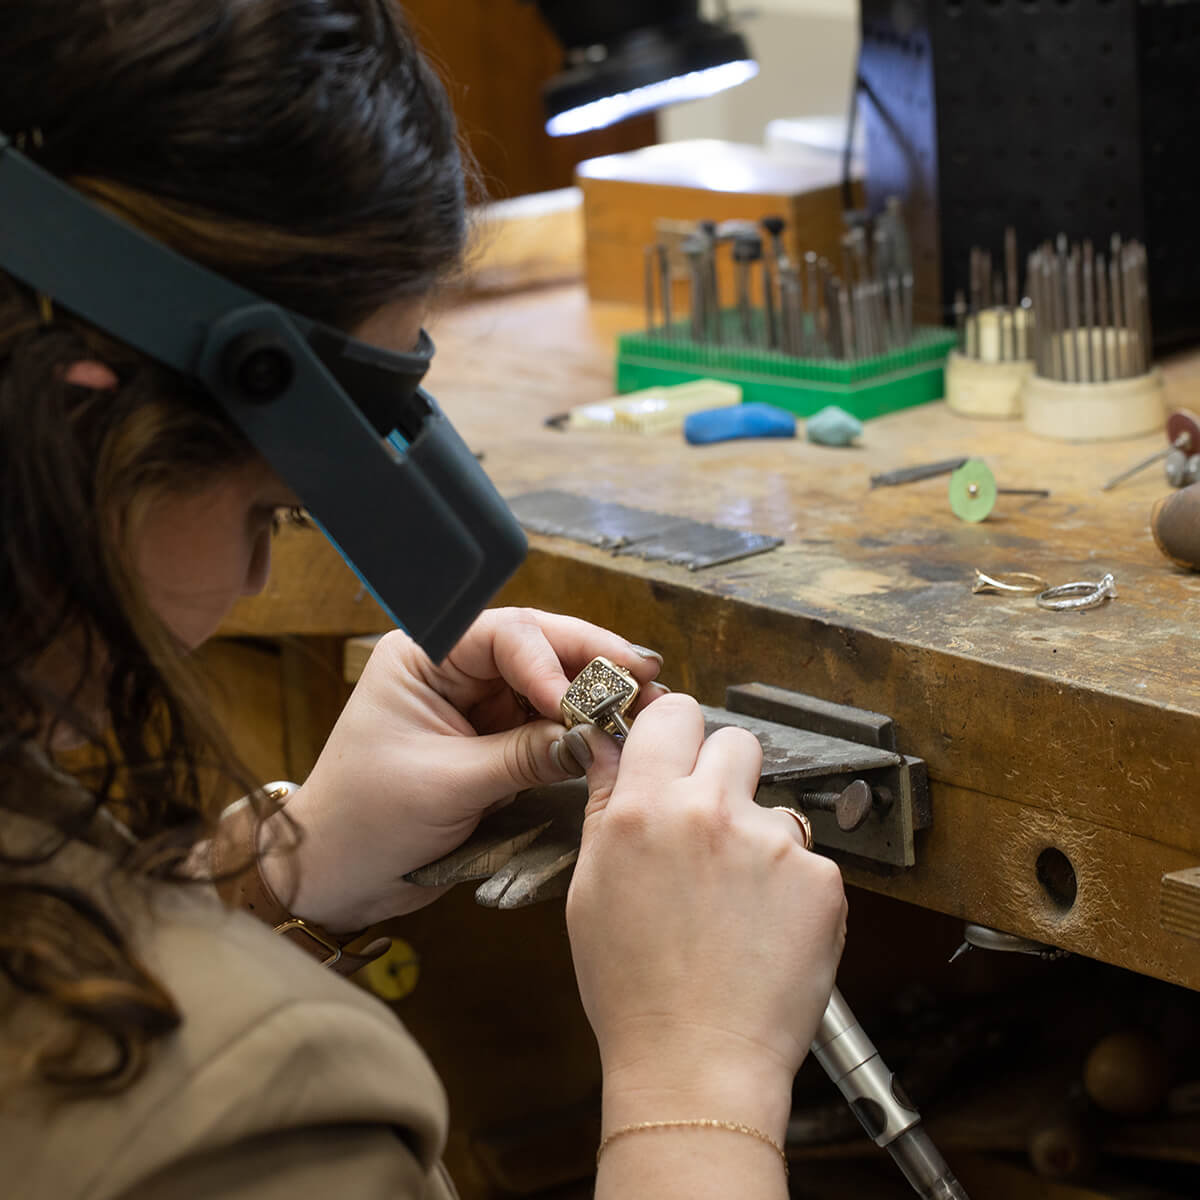 Diamond Cellar offers expert jewelry repair near Columbus, OH. Additional services include jewelry appraisal and watch servicing. Call or visit our Easton Town Center location today.